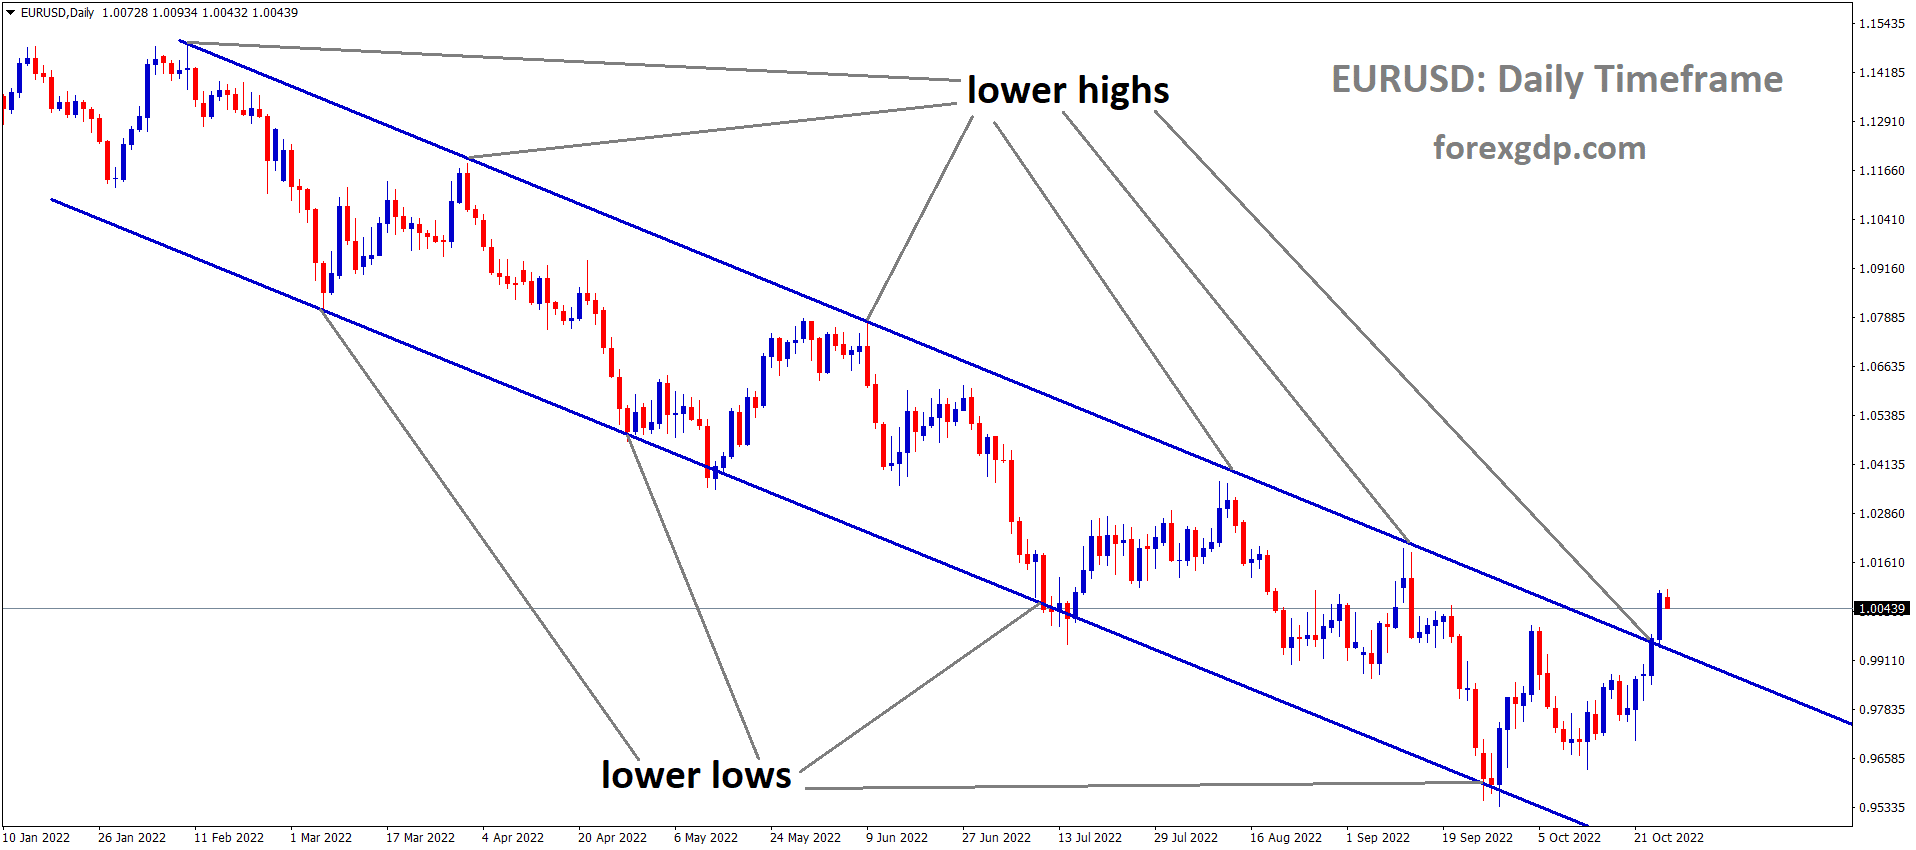 EURUSD is moving in the Descending channel and the market has reached the lower high area of the channel 6